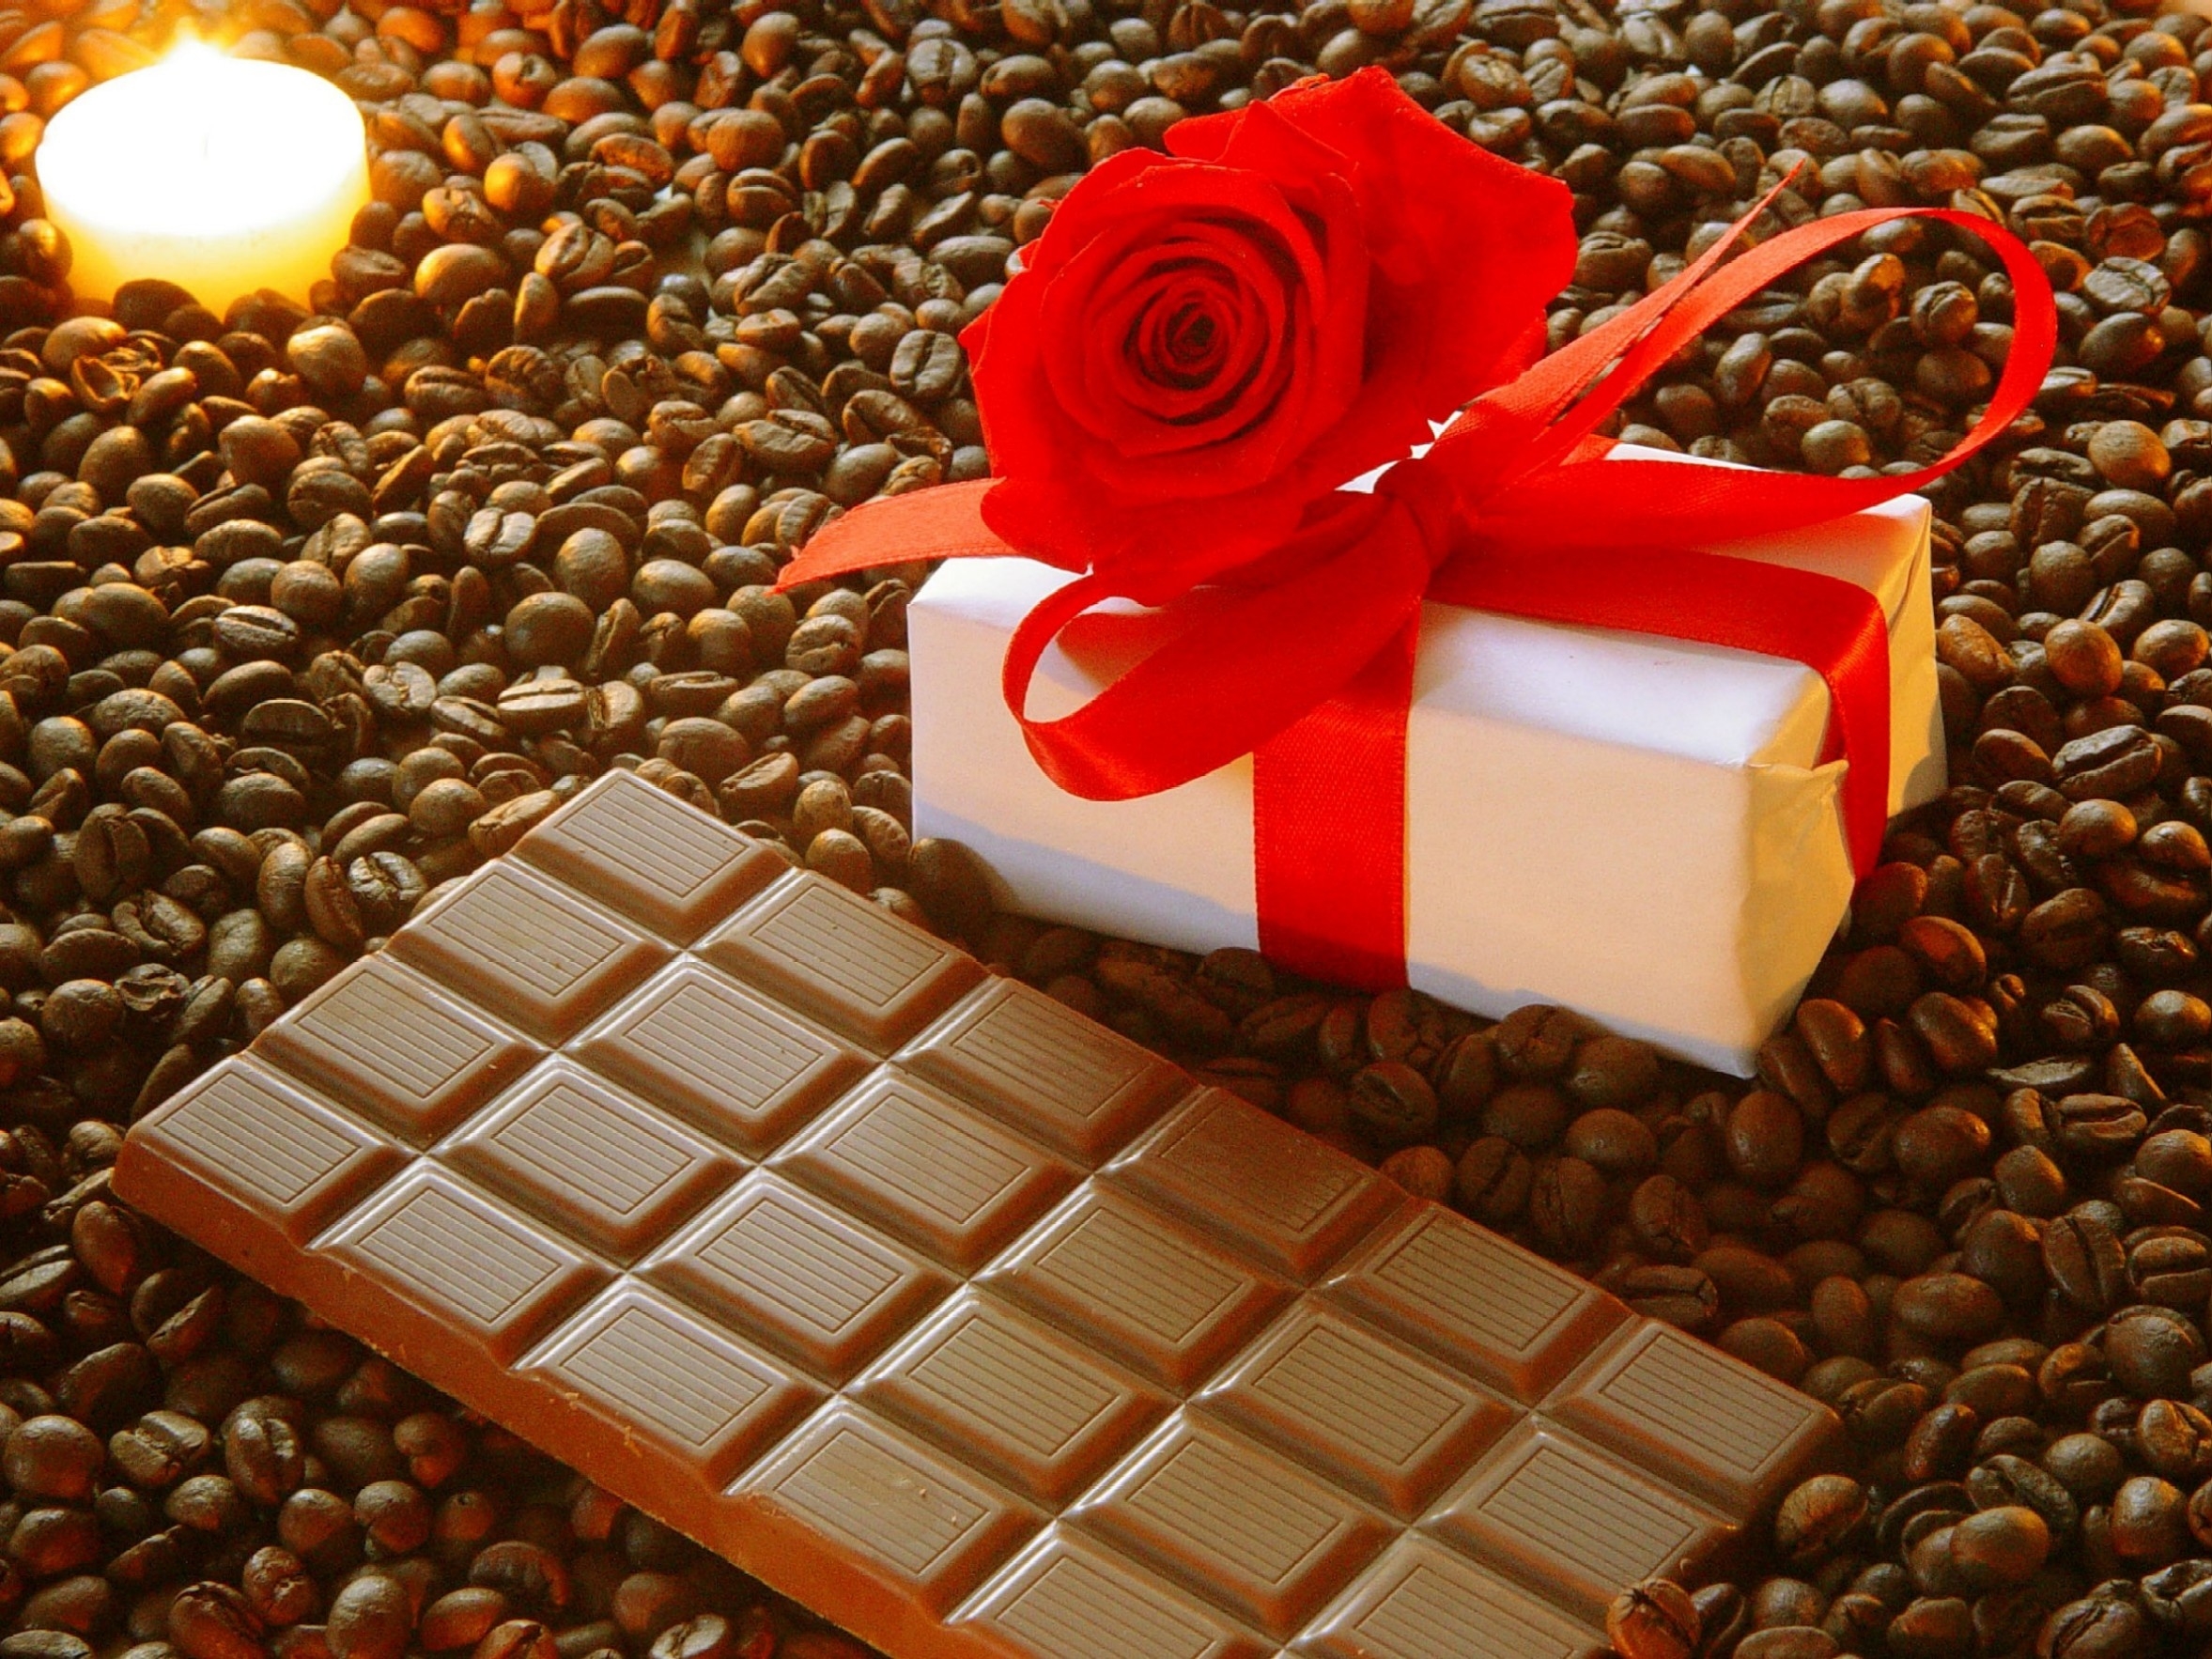 romance, rose flower, food, chocolate, coffee, rose, holiday, present, gift, bow, grains, candle, grain